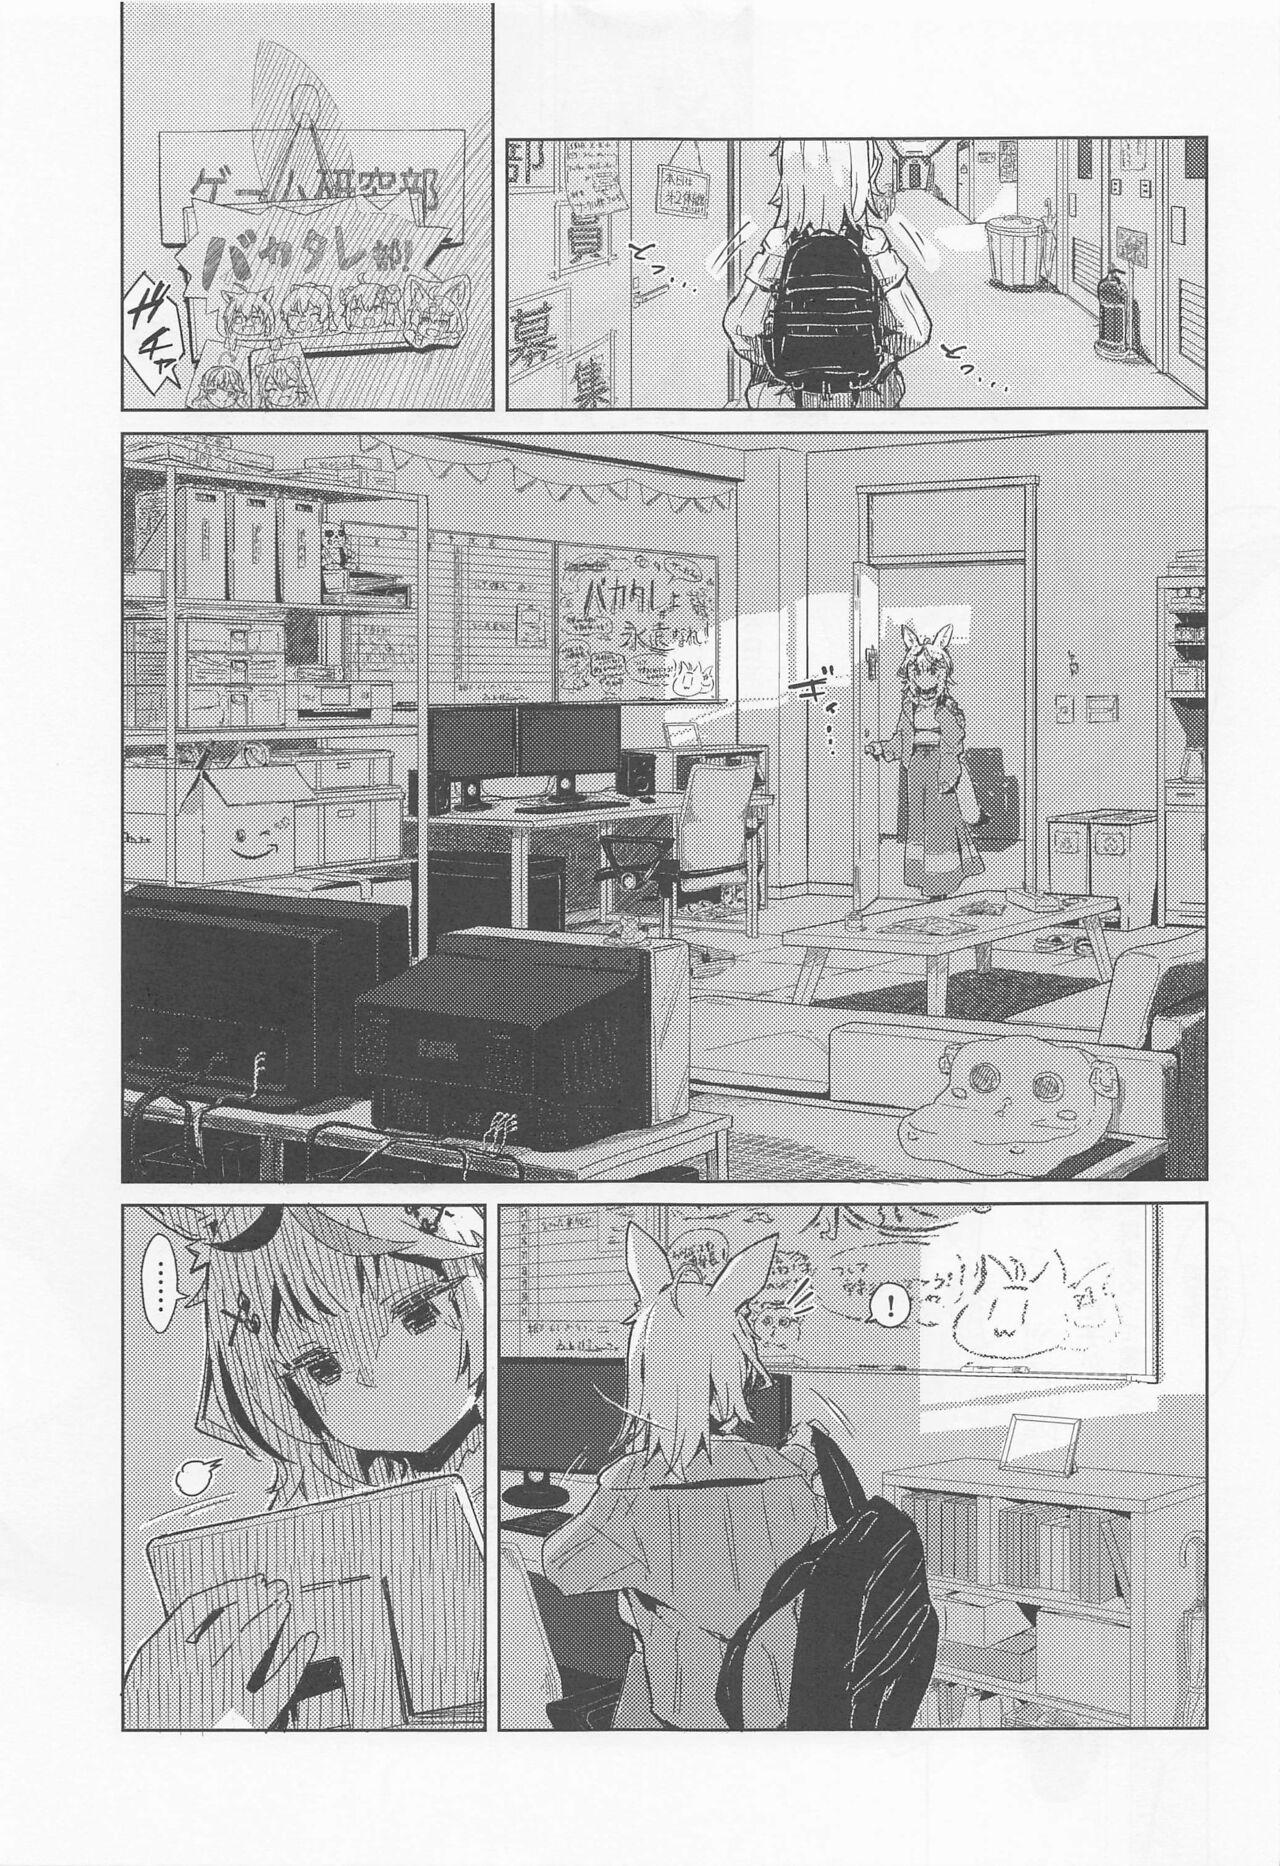 Blond Fennec wa Iseijin no Yume o Miru ka - Does The Fennec Dream of The Lovely Visitor? - Hololive Mamando - Page 2